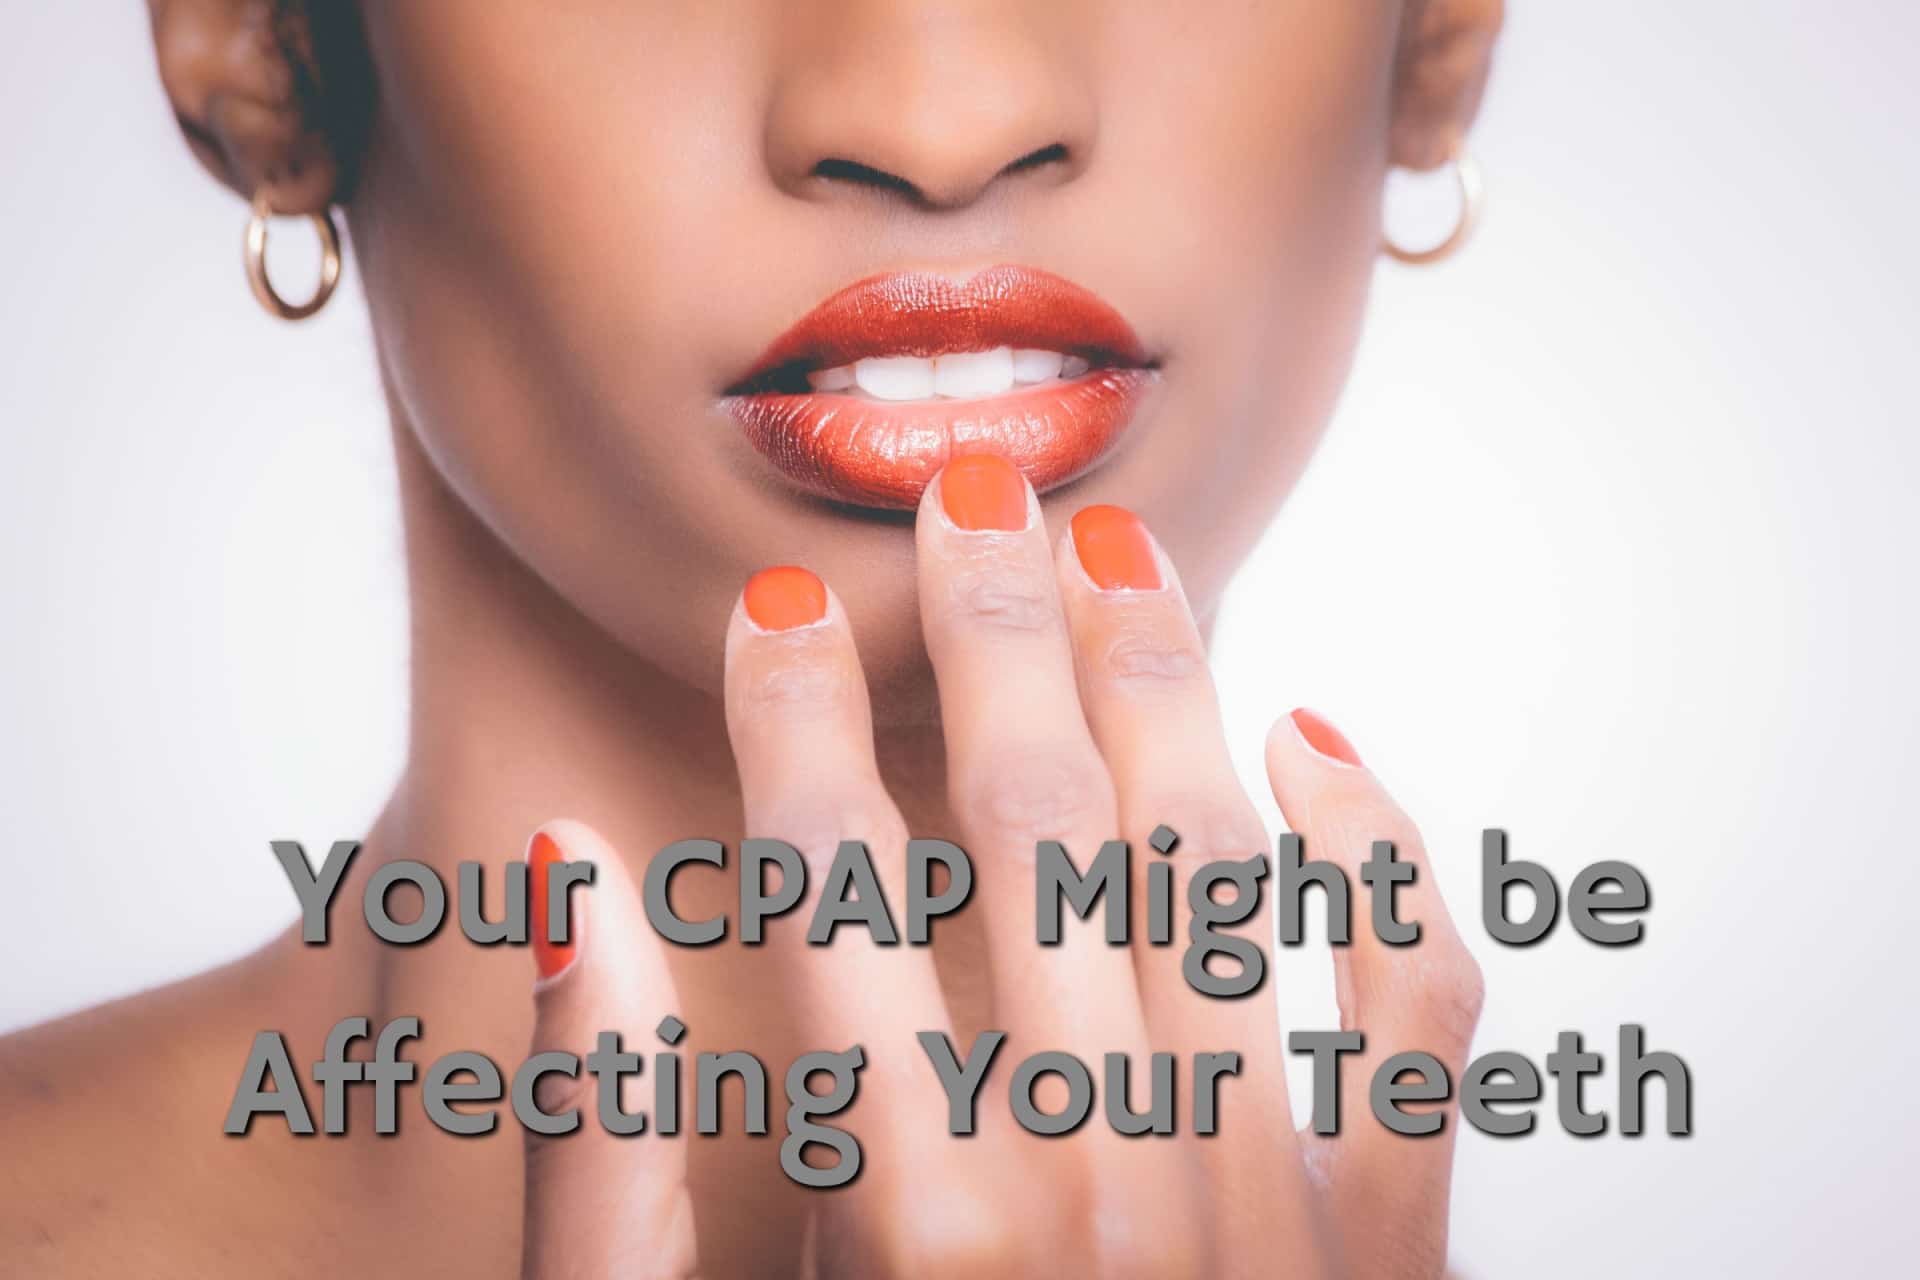 Woman interested in CPAP alternatives to treat her sleep apnea and prevent problems with her teeth